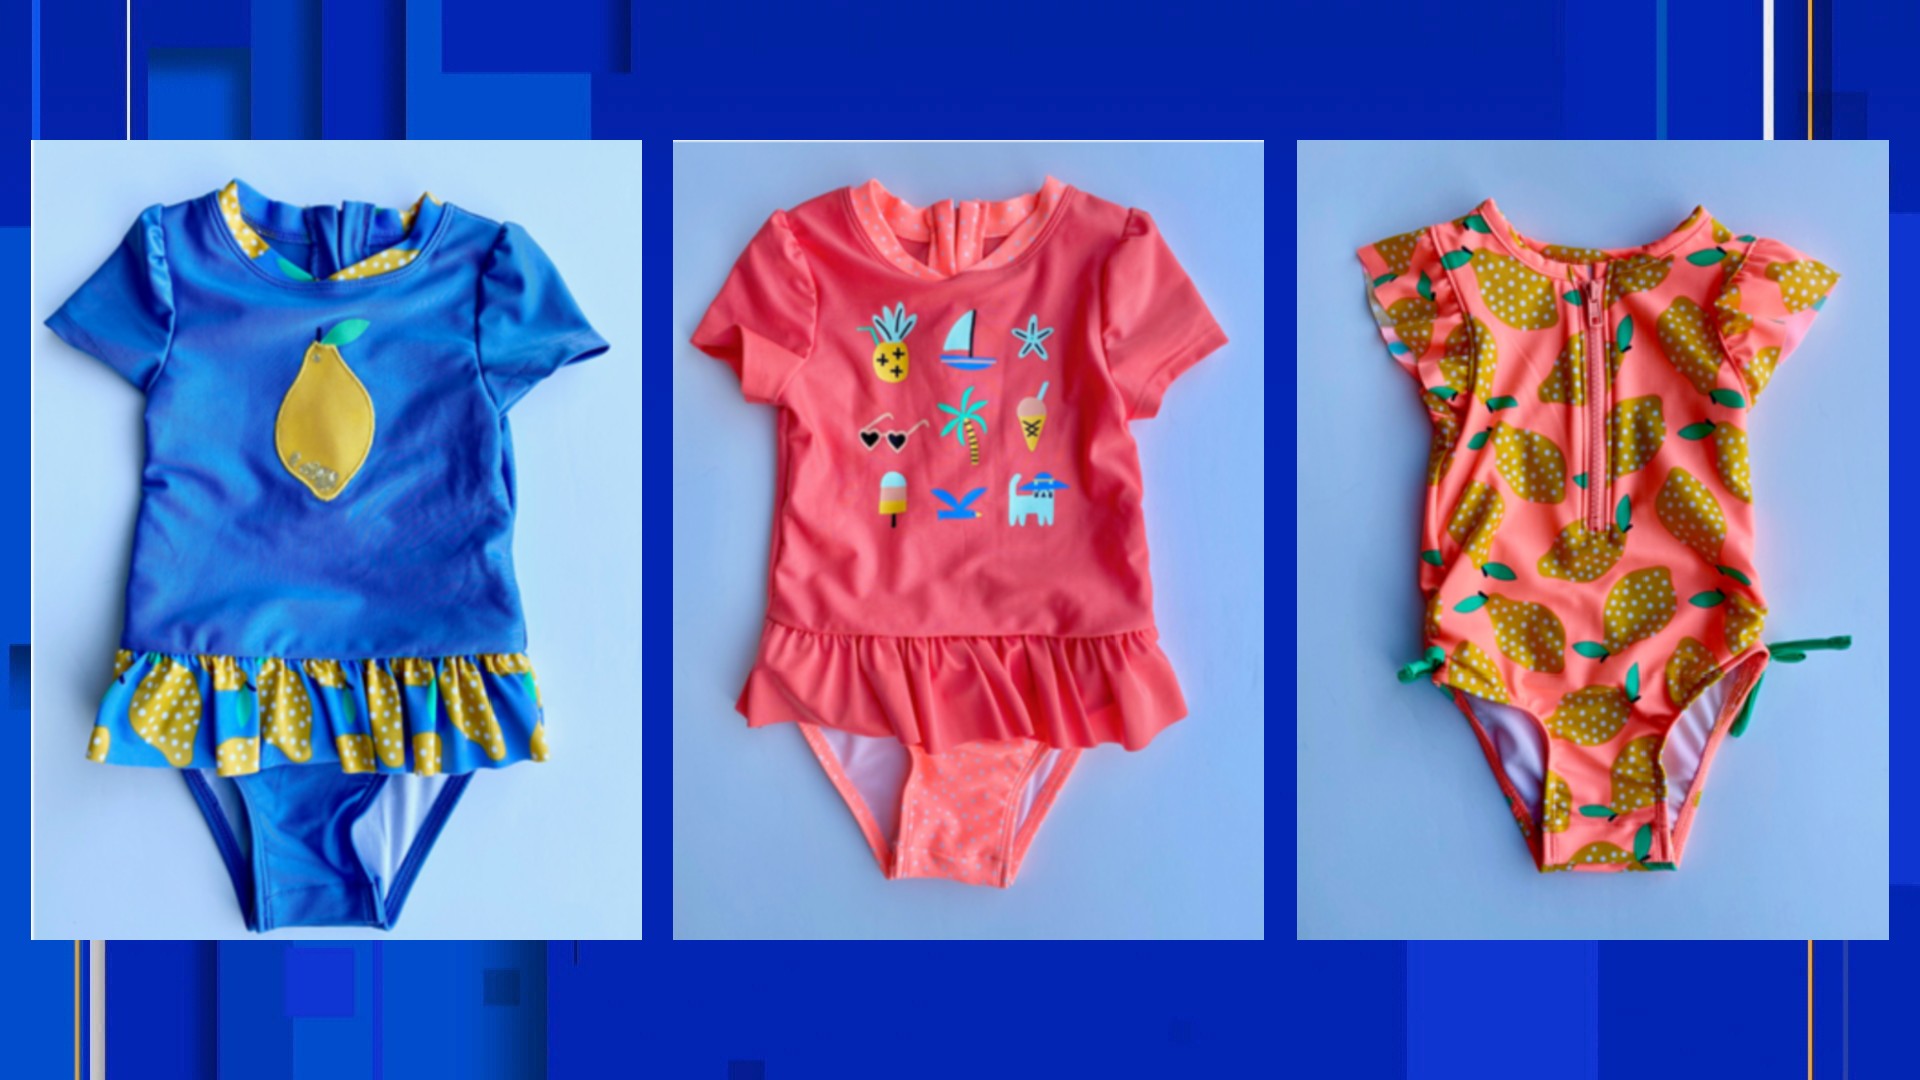 Target recalls 181,000 infant-toddler swimsuits due to potential